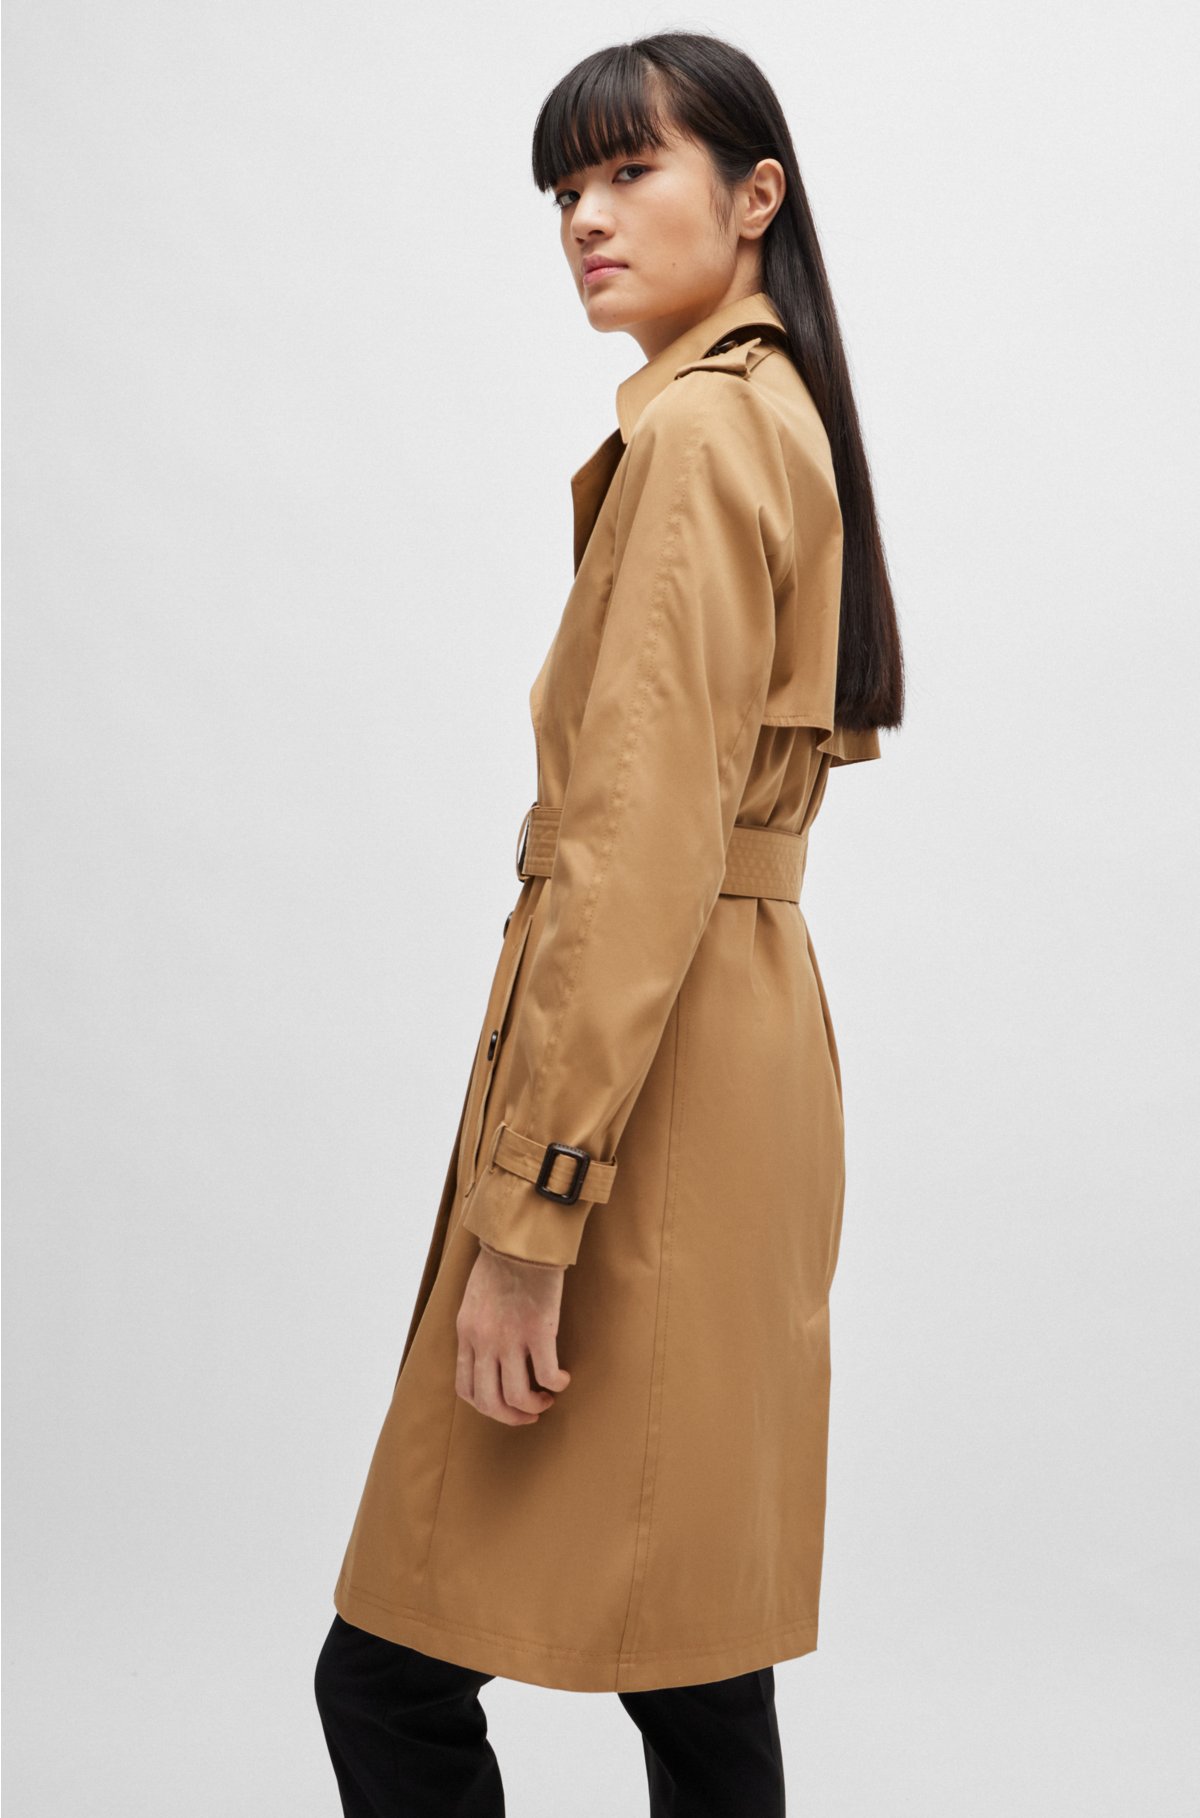 BOSS - Regular-fit trench coat with buckled belt